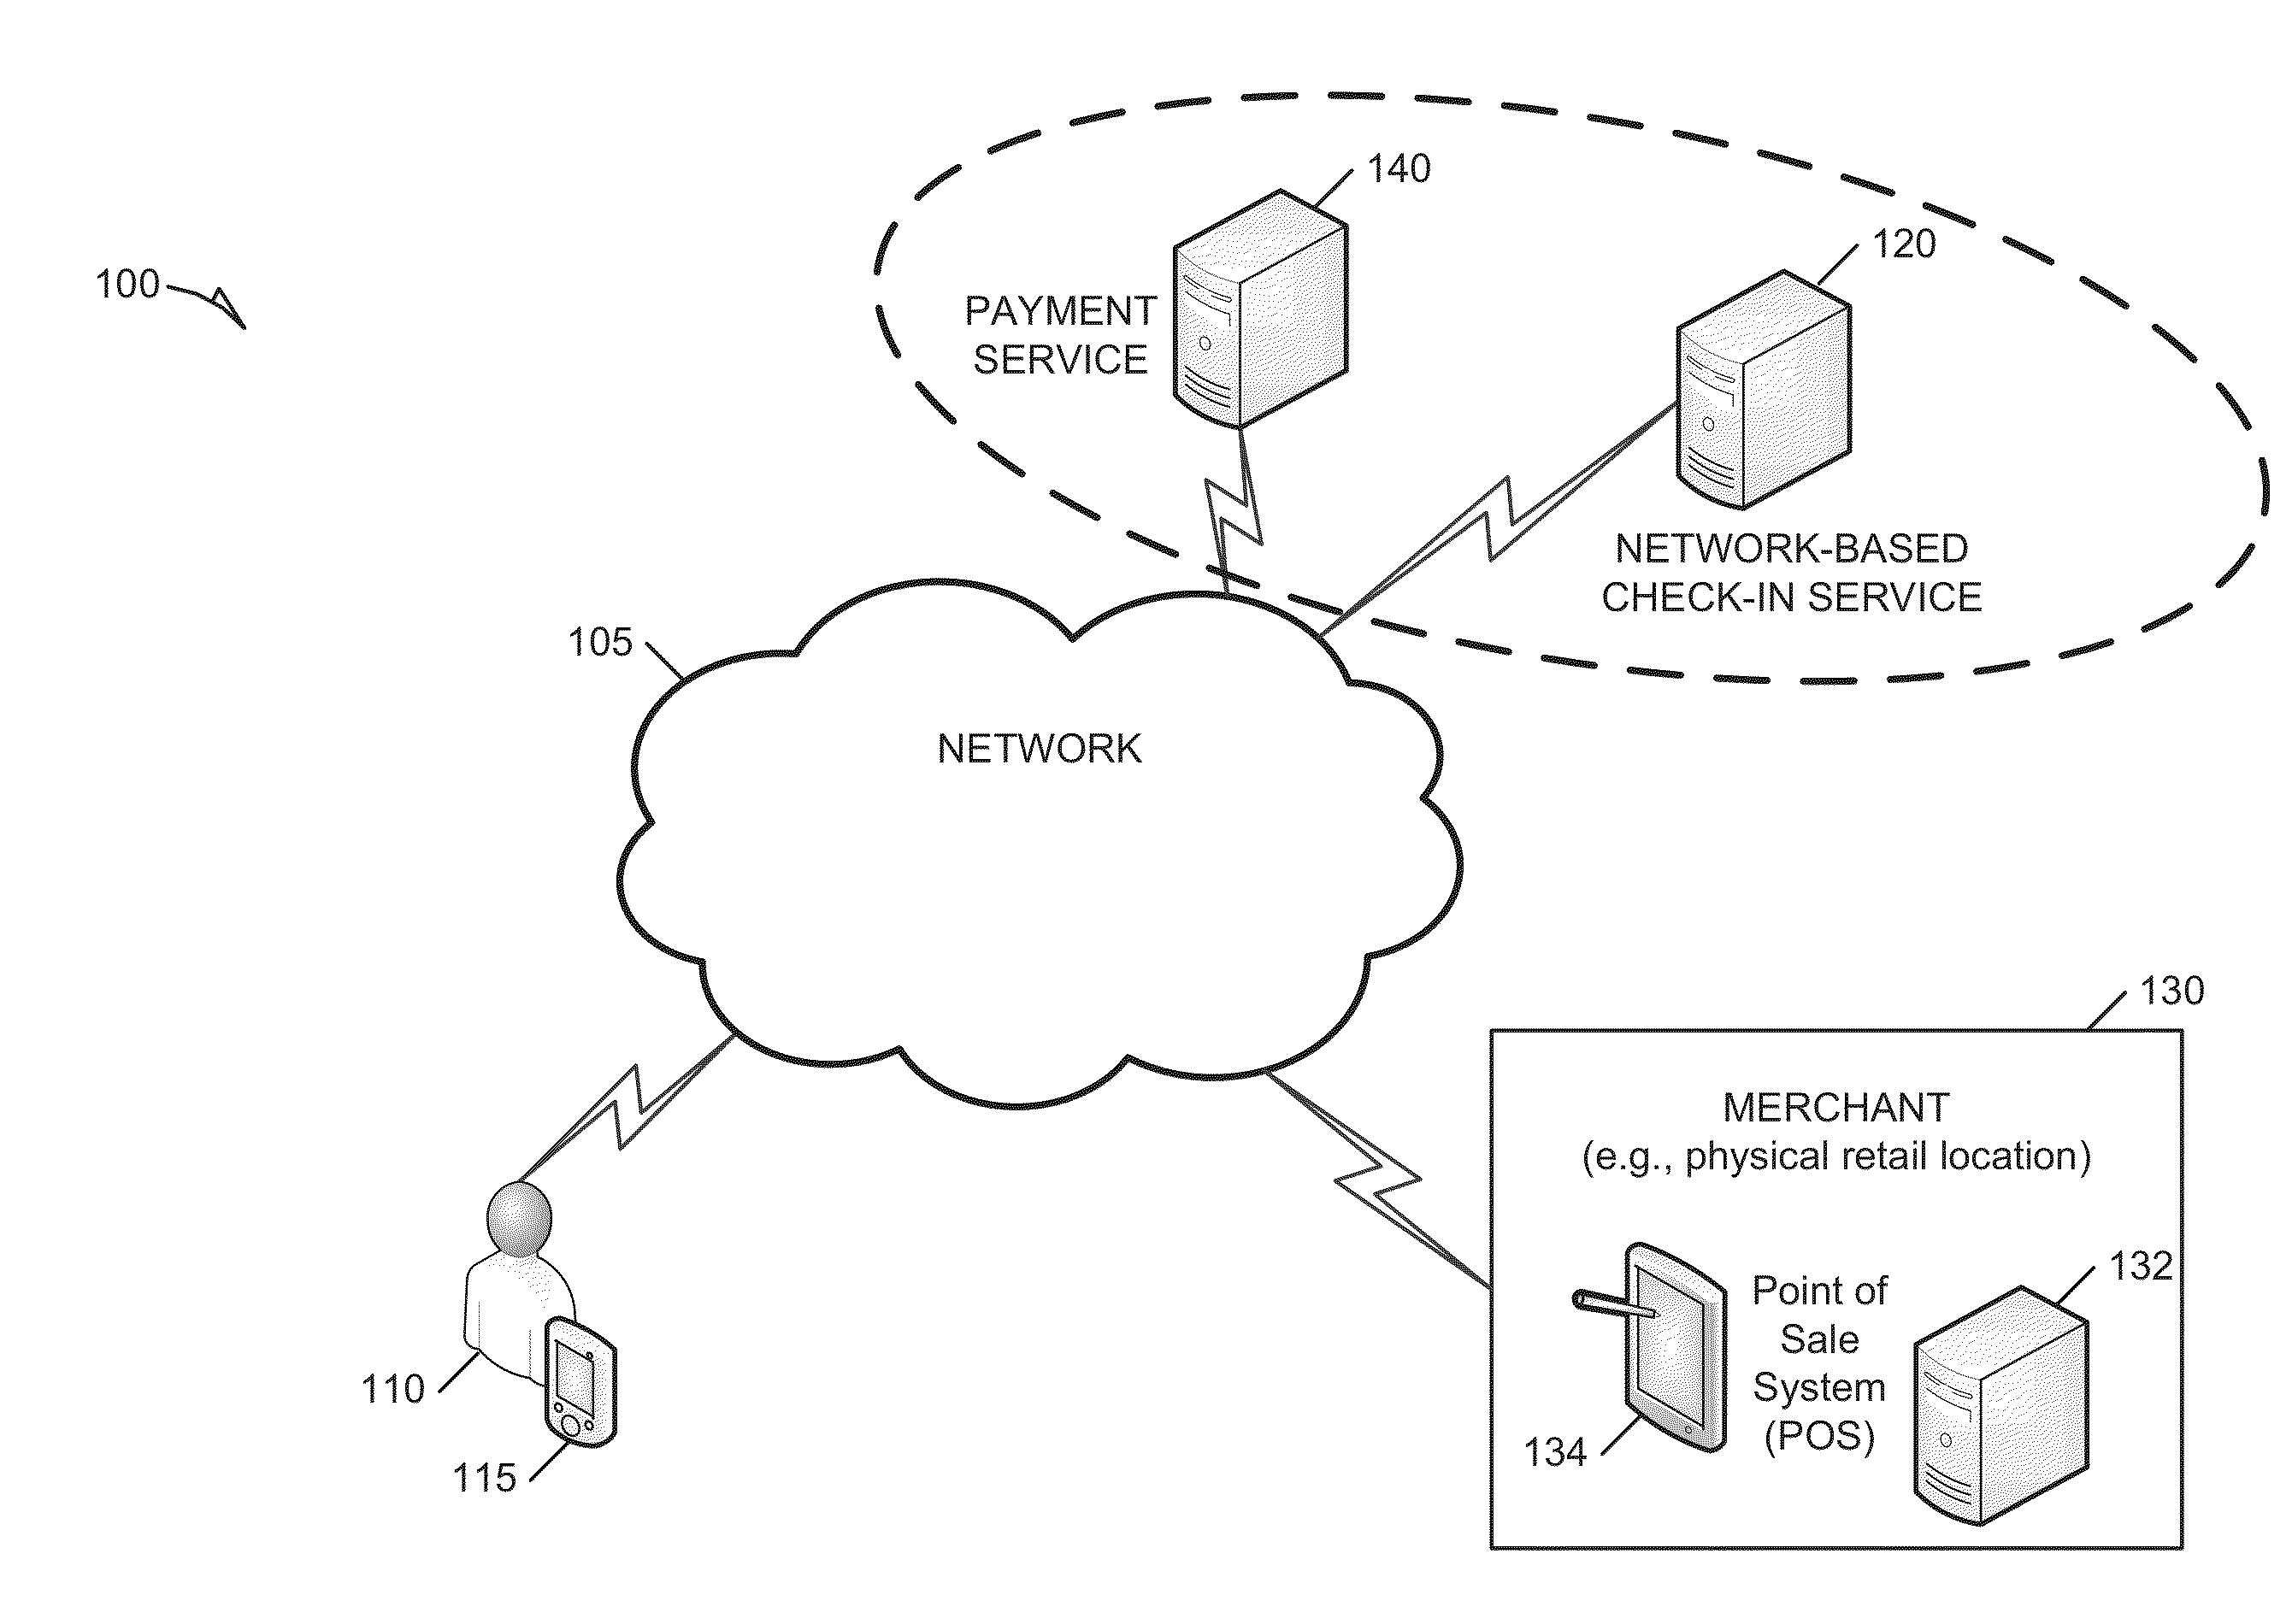 Systems and methods to provide check-in based payment processes